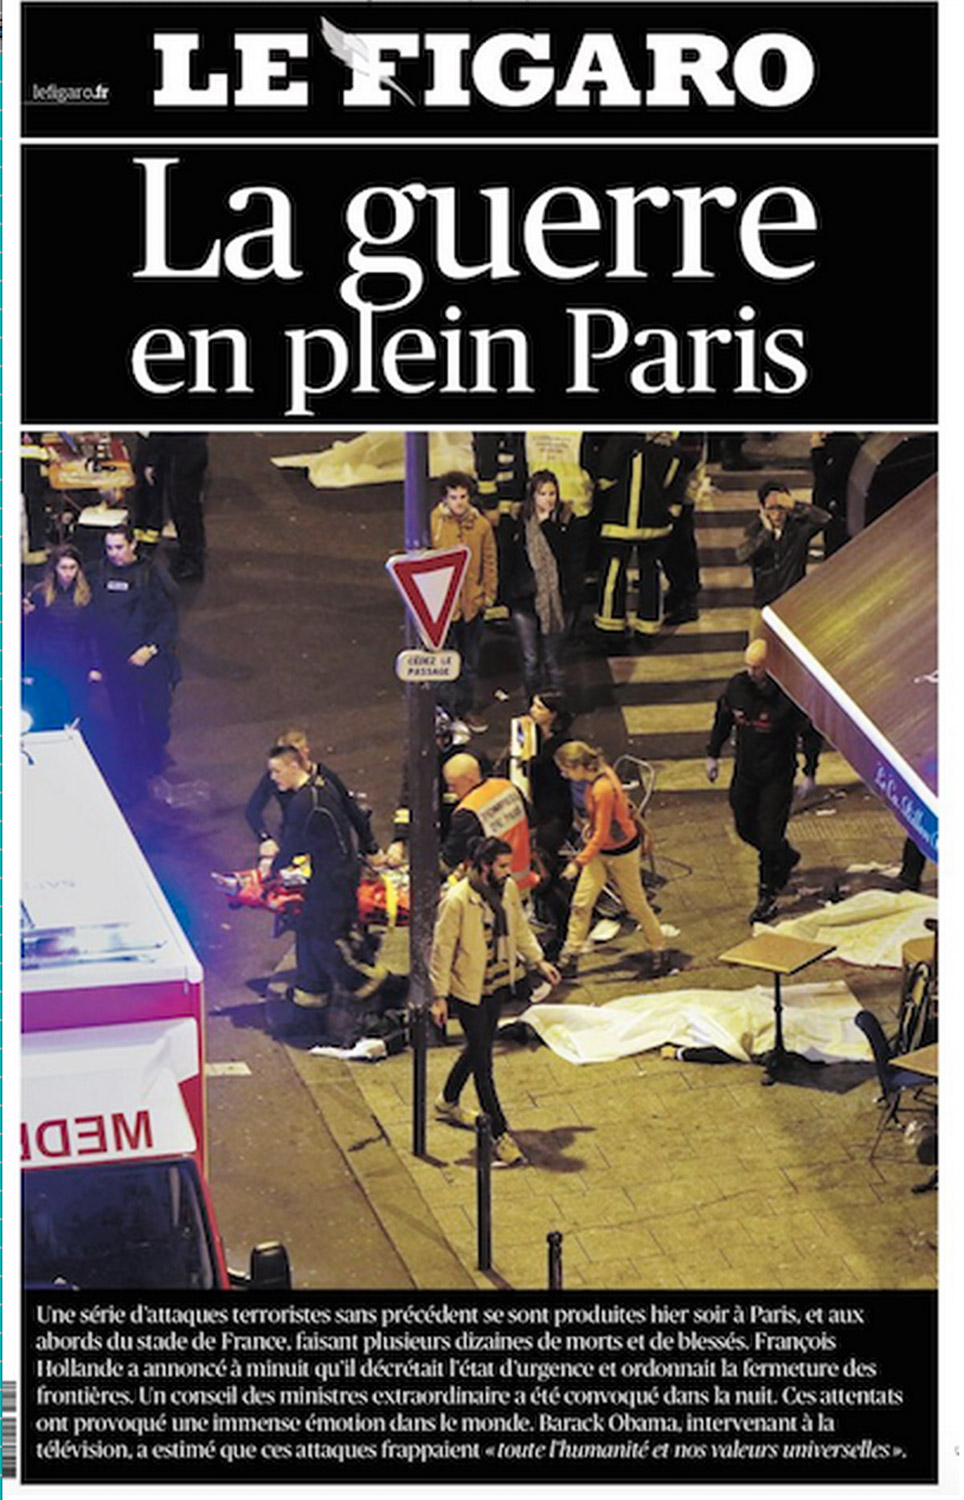 The front page of Le Figaro after the Paris attacks on Nov. 13, 2015